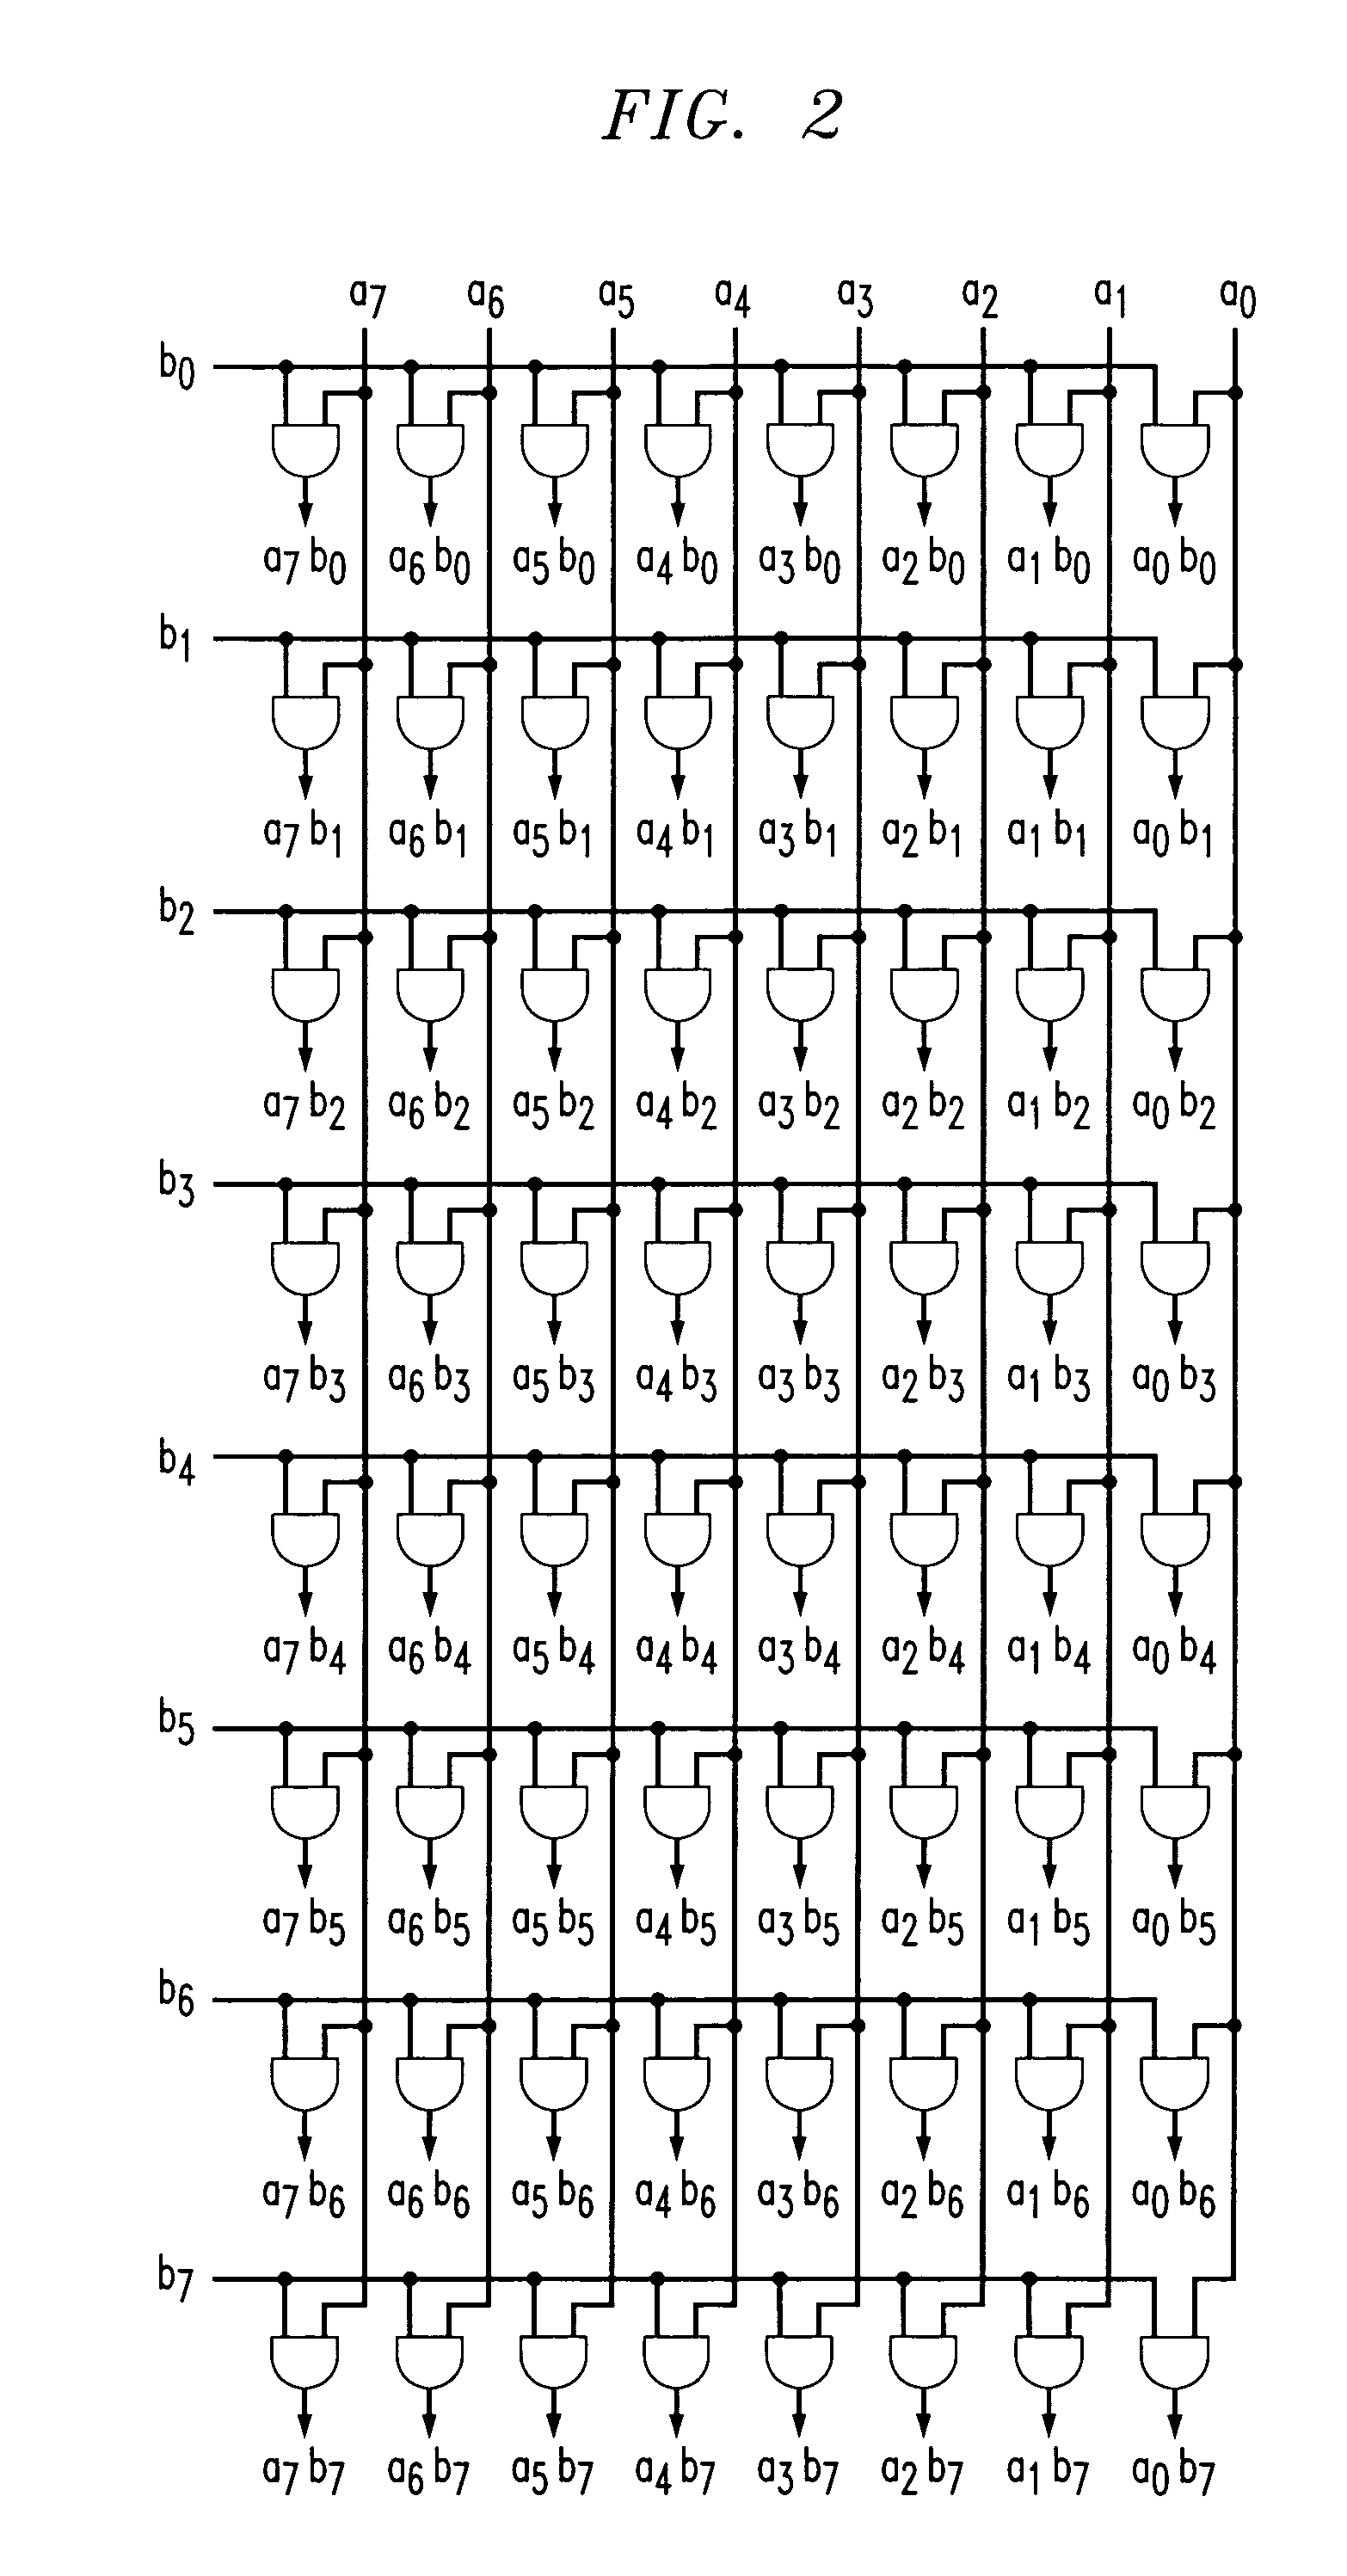 Multiplier and cipher circuit